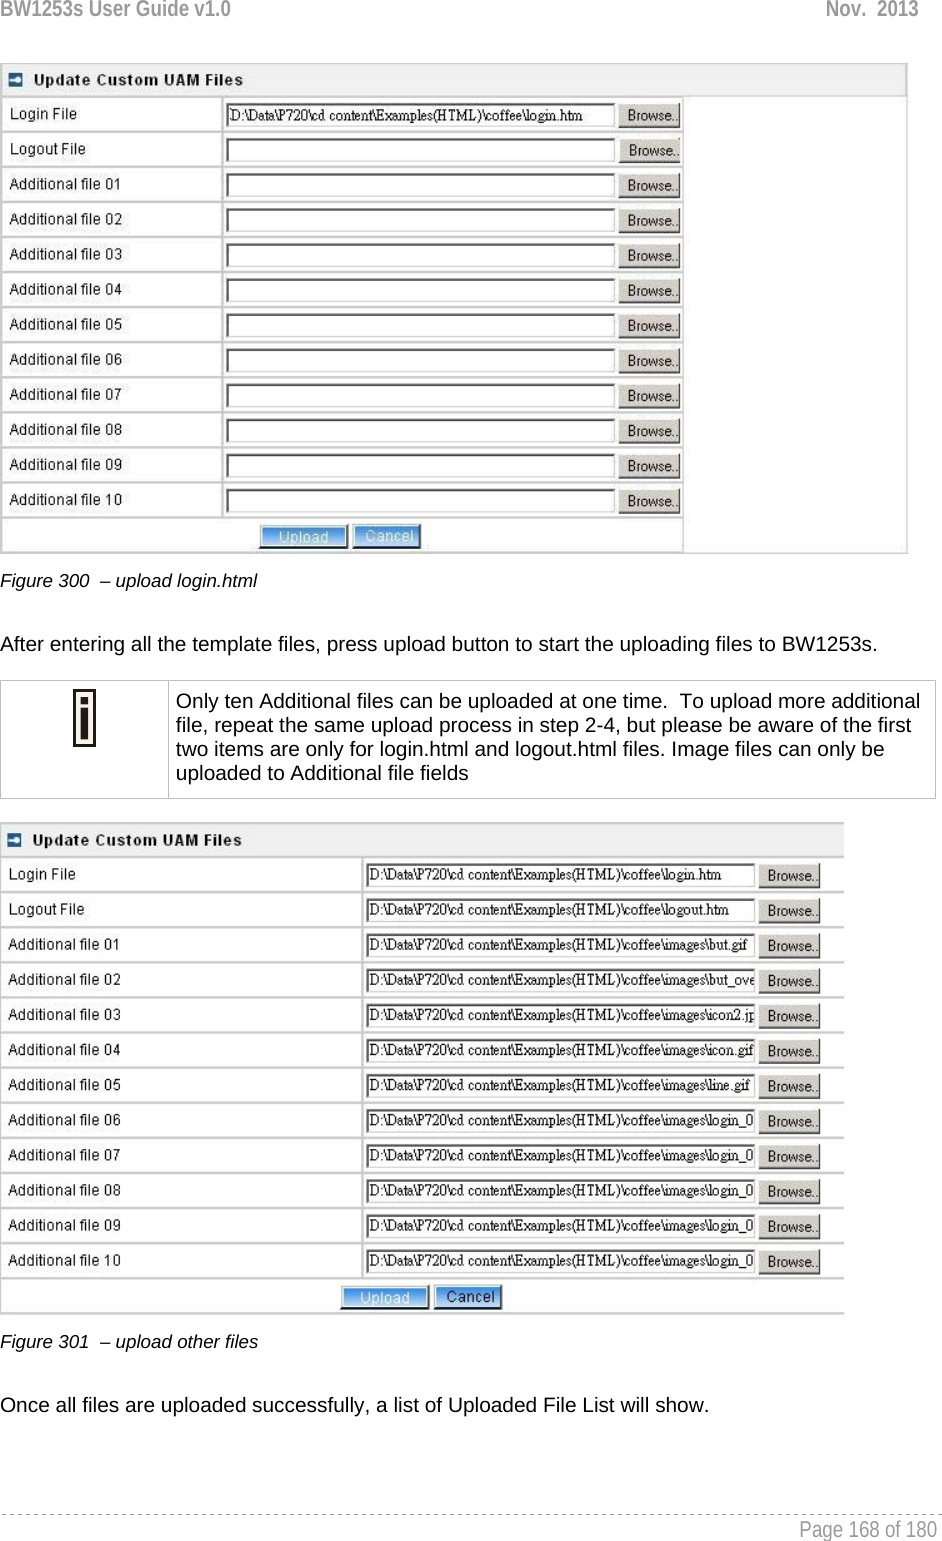 BW1253s User Guide v1.0  Nov.  2013     Page 168 of 180    Figure 300  – upload login.html   After entering all the template files, press upload button to start the uploading files to BW1253s.   Only ten Additional files can be uploaded at one time.  To upload more additional file, repeat the same upload process in step 2-4, but please be aware of the first two items are only for login.html and logout.html files. Image files can only be uploaded to Additional file fields   Figure 301  – upload other files   Once all files are uploaded successfully, a list of Uploaded File List will show. 